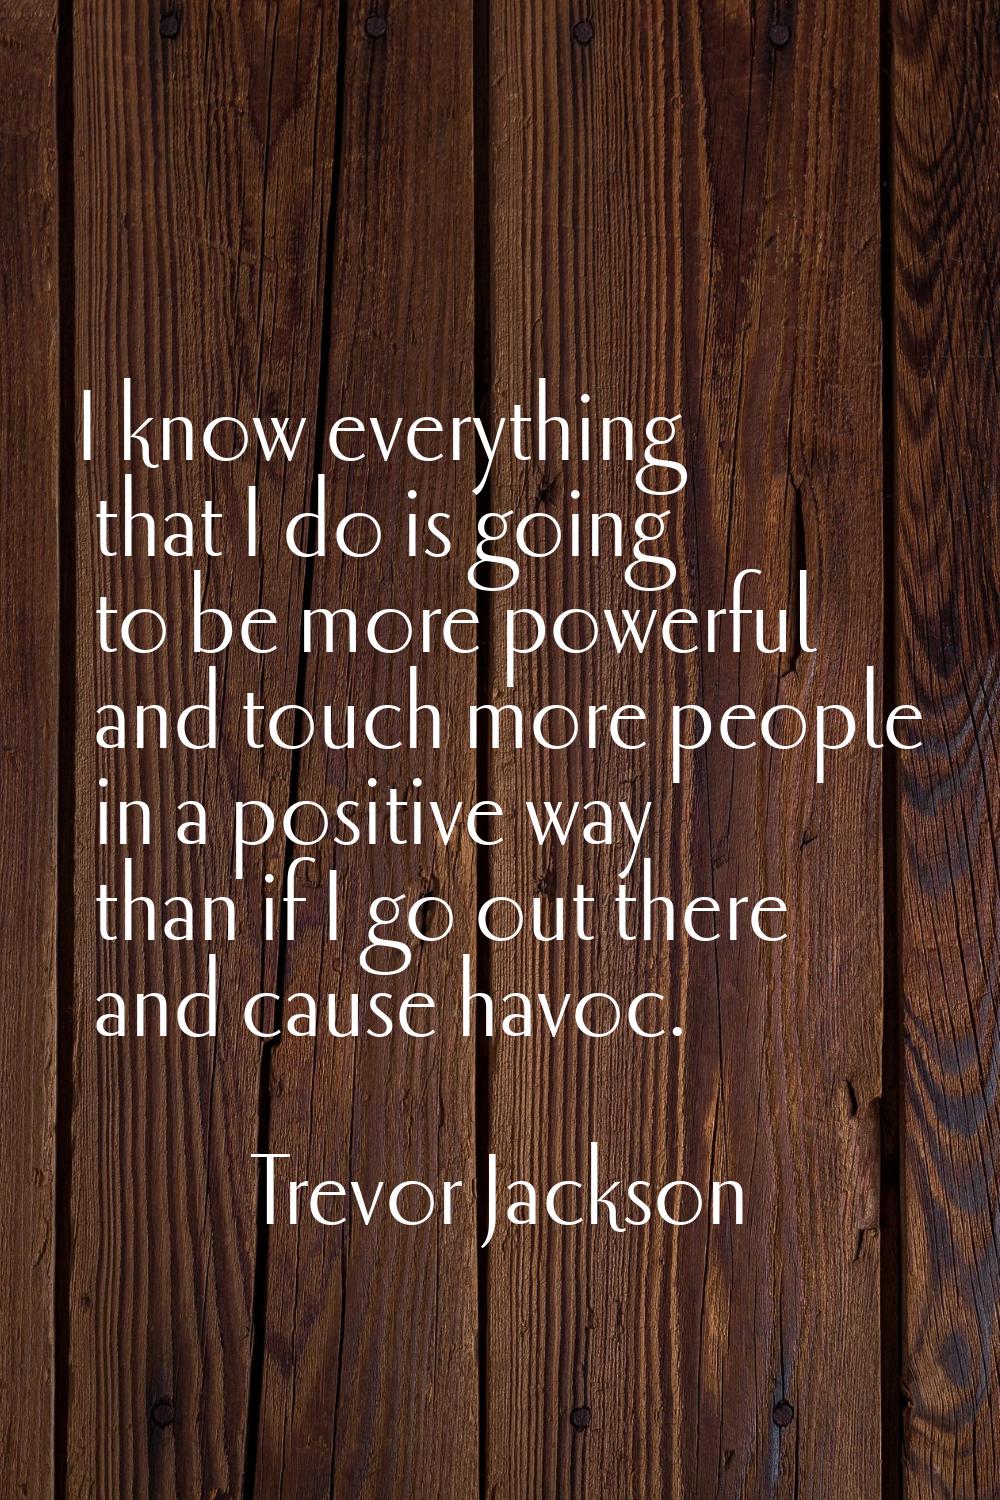 I know everything that I do is going to be more powerful and touch more people in a positive way th